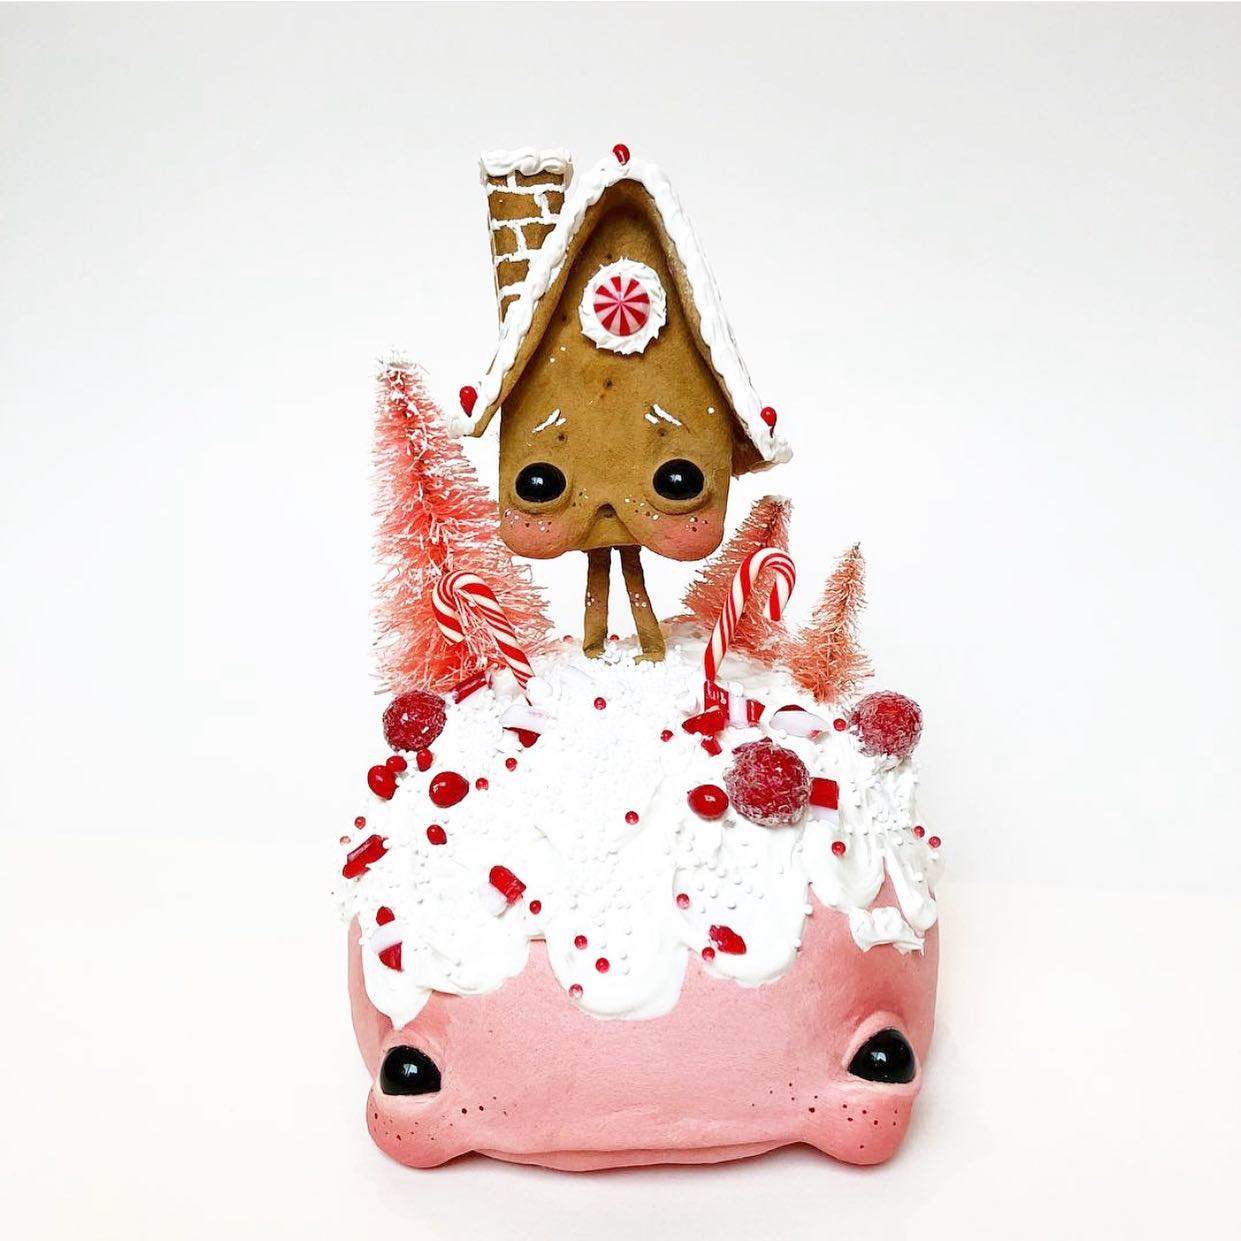 Cute And Creepy Little Monster Toys By Sara Duarte (16)